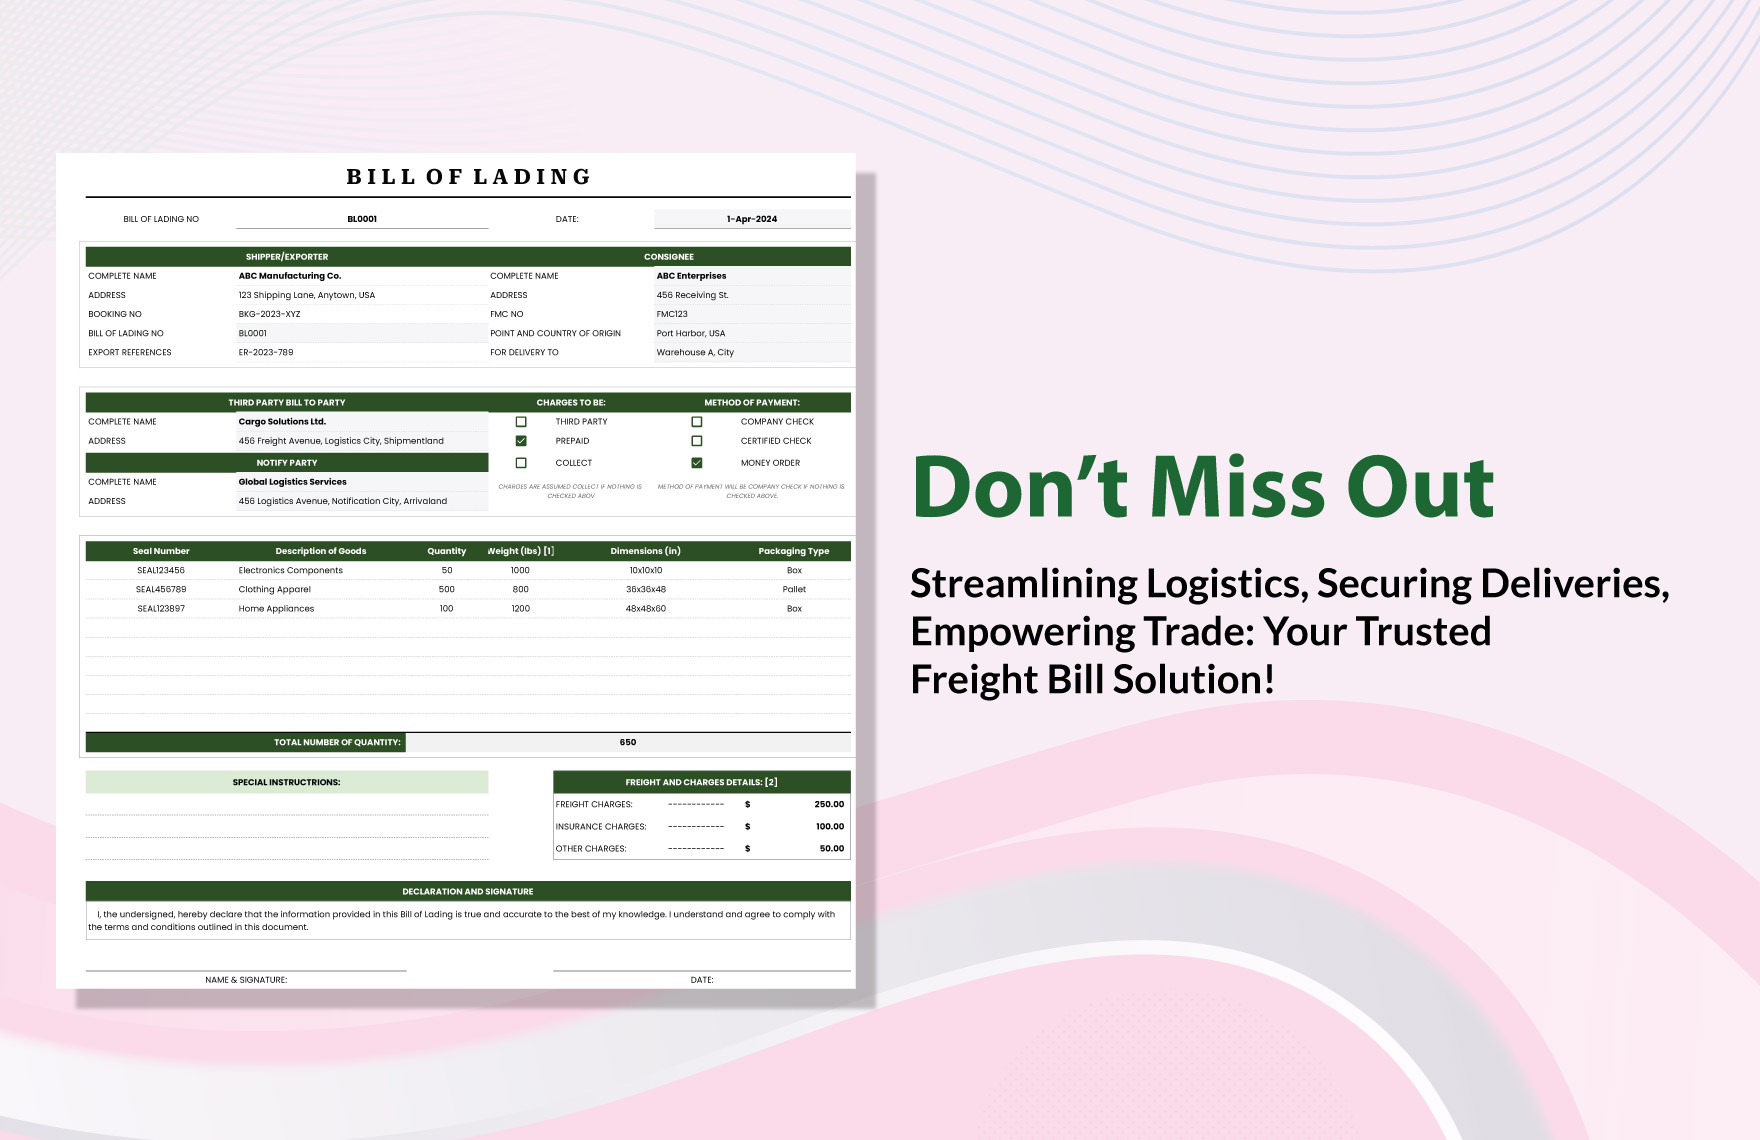 Truck Freight Bill of Lading Template